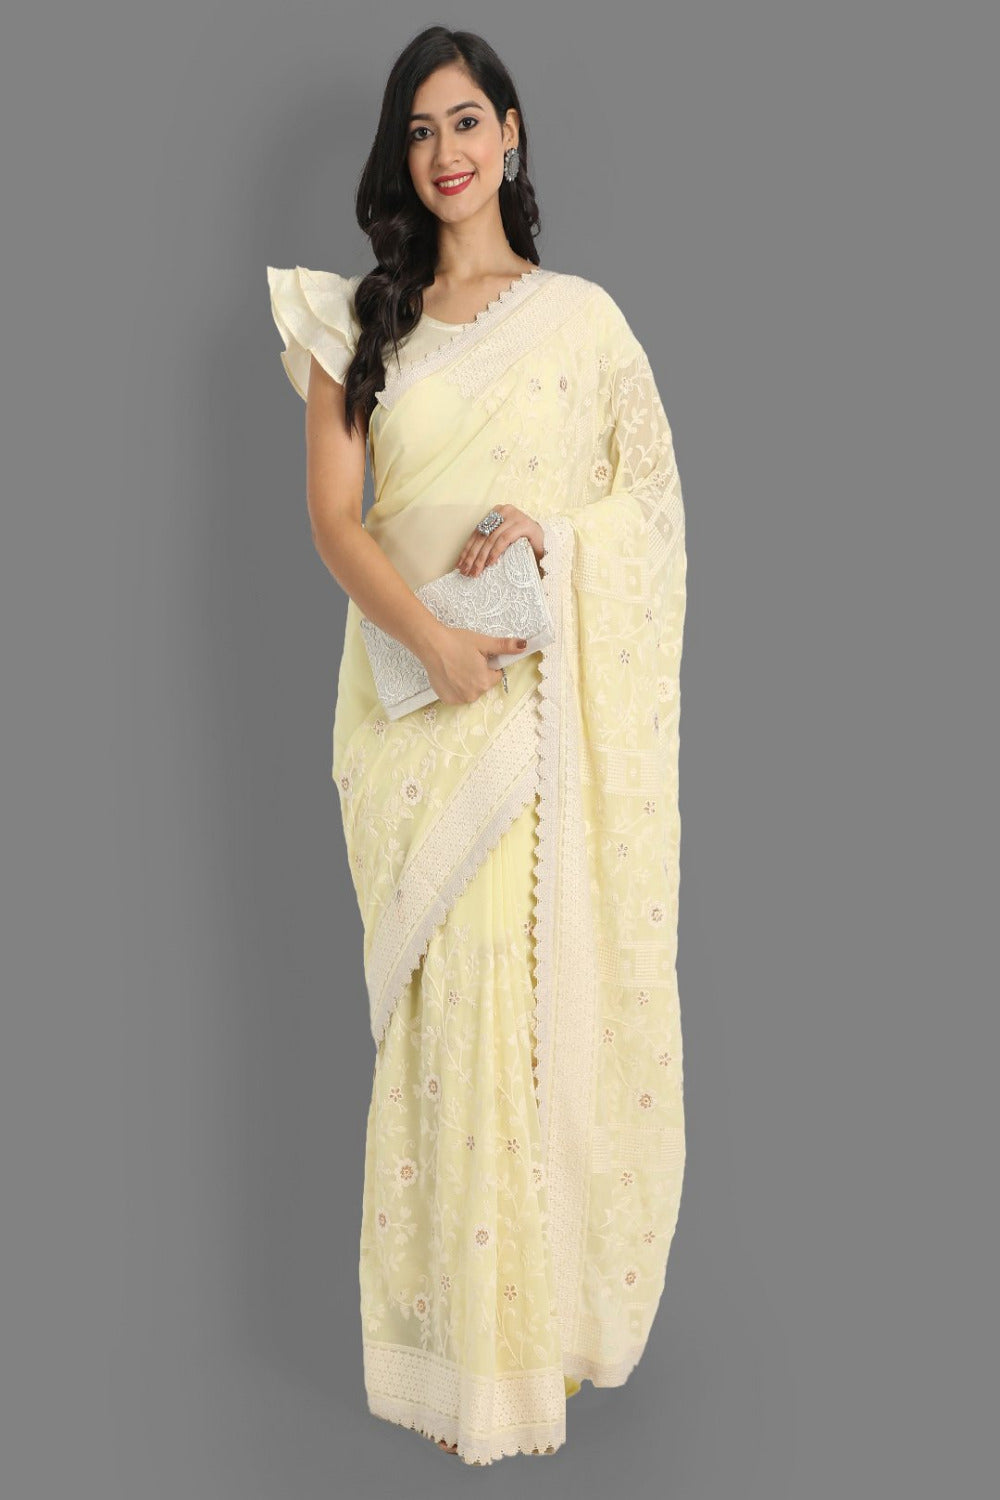 Buy Maria Yellow Faux Georgette Embroidered One Minute Saree Online - One Minute Saree